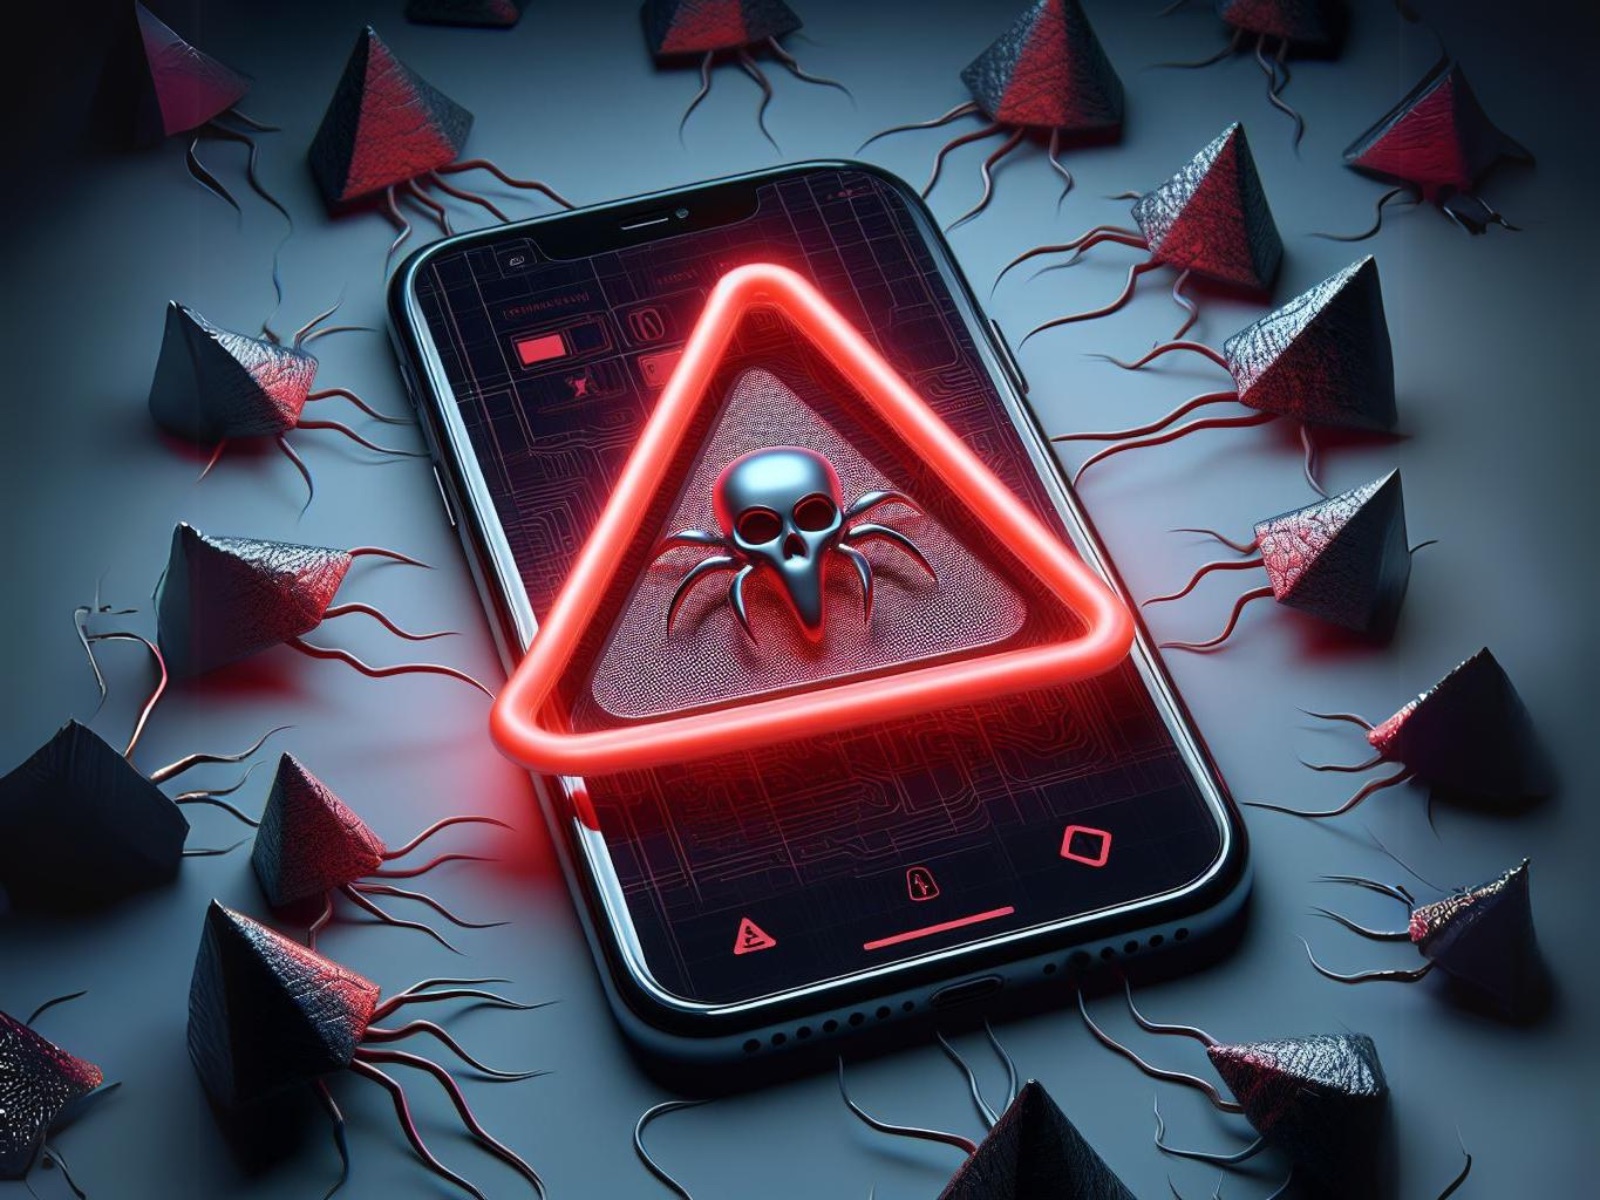 Most sophisticated iPhone malware attack ever seen detailed in Kaspersky’s ‘Operation Triangulation’ report